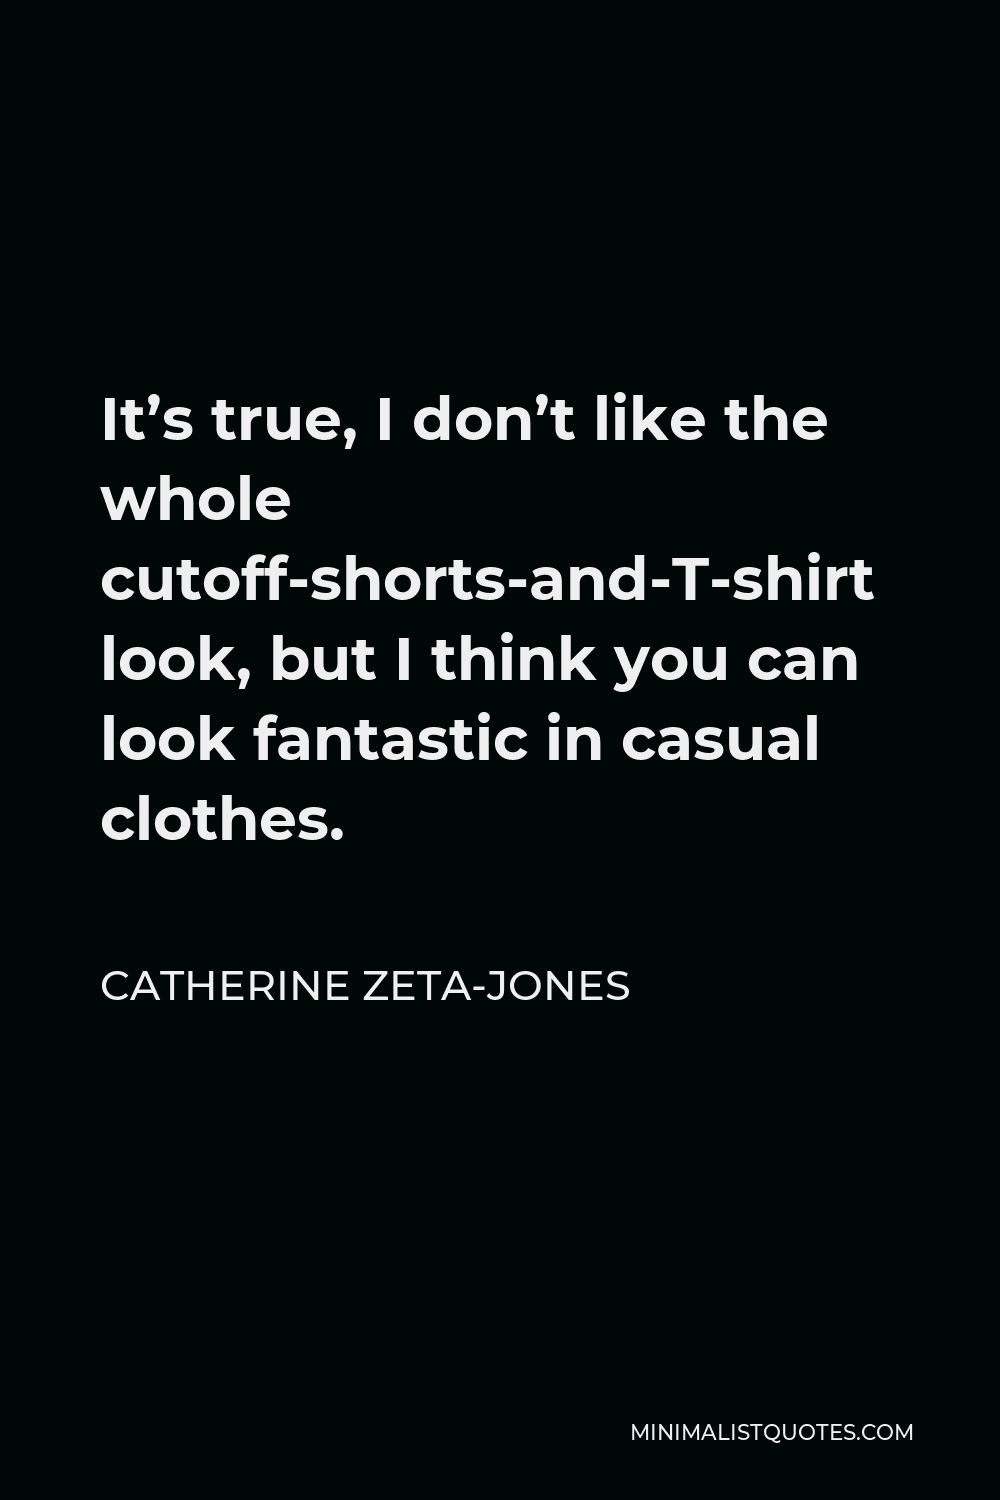 Catherine Zeta-Jones Quote - It’s true, I don’t like the whole cutoff-shorts-and-T-shirt look, but I think you can look fantastic in casual clothes.